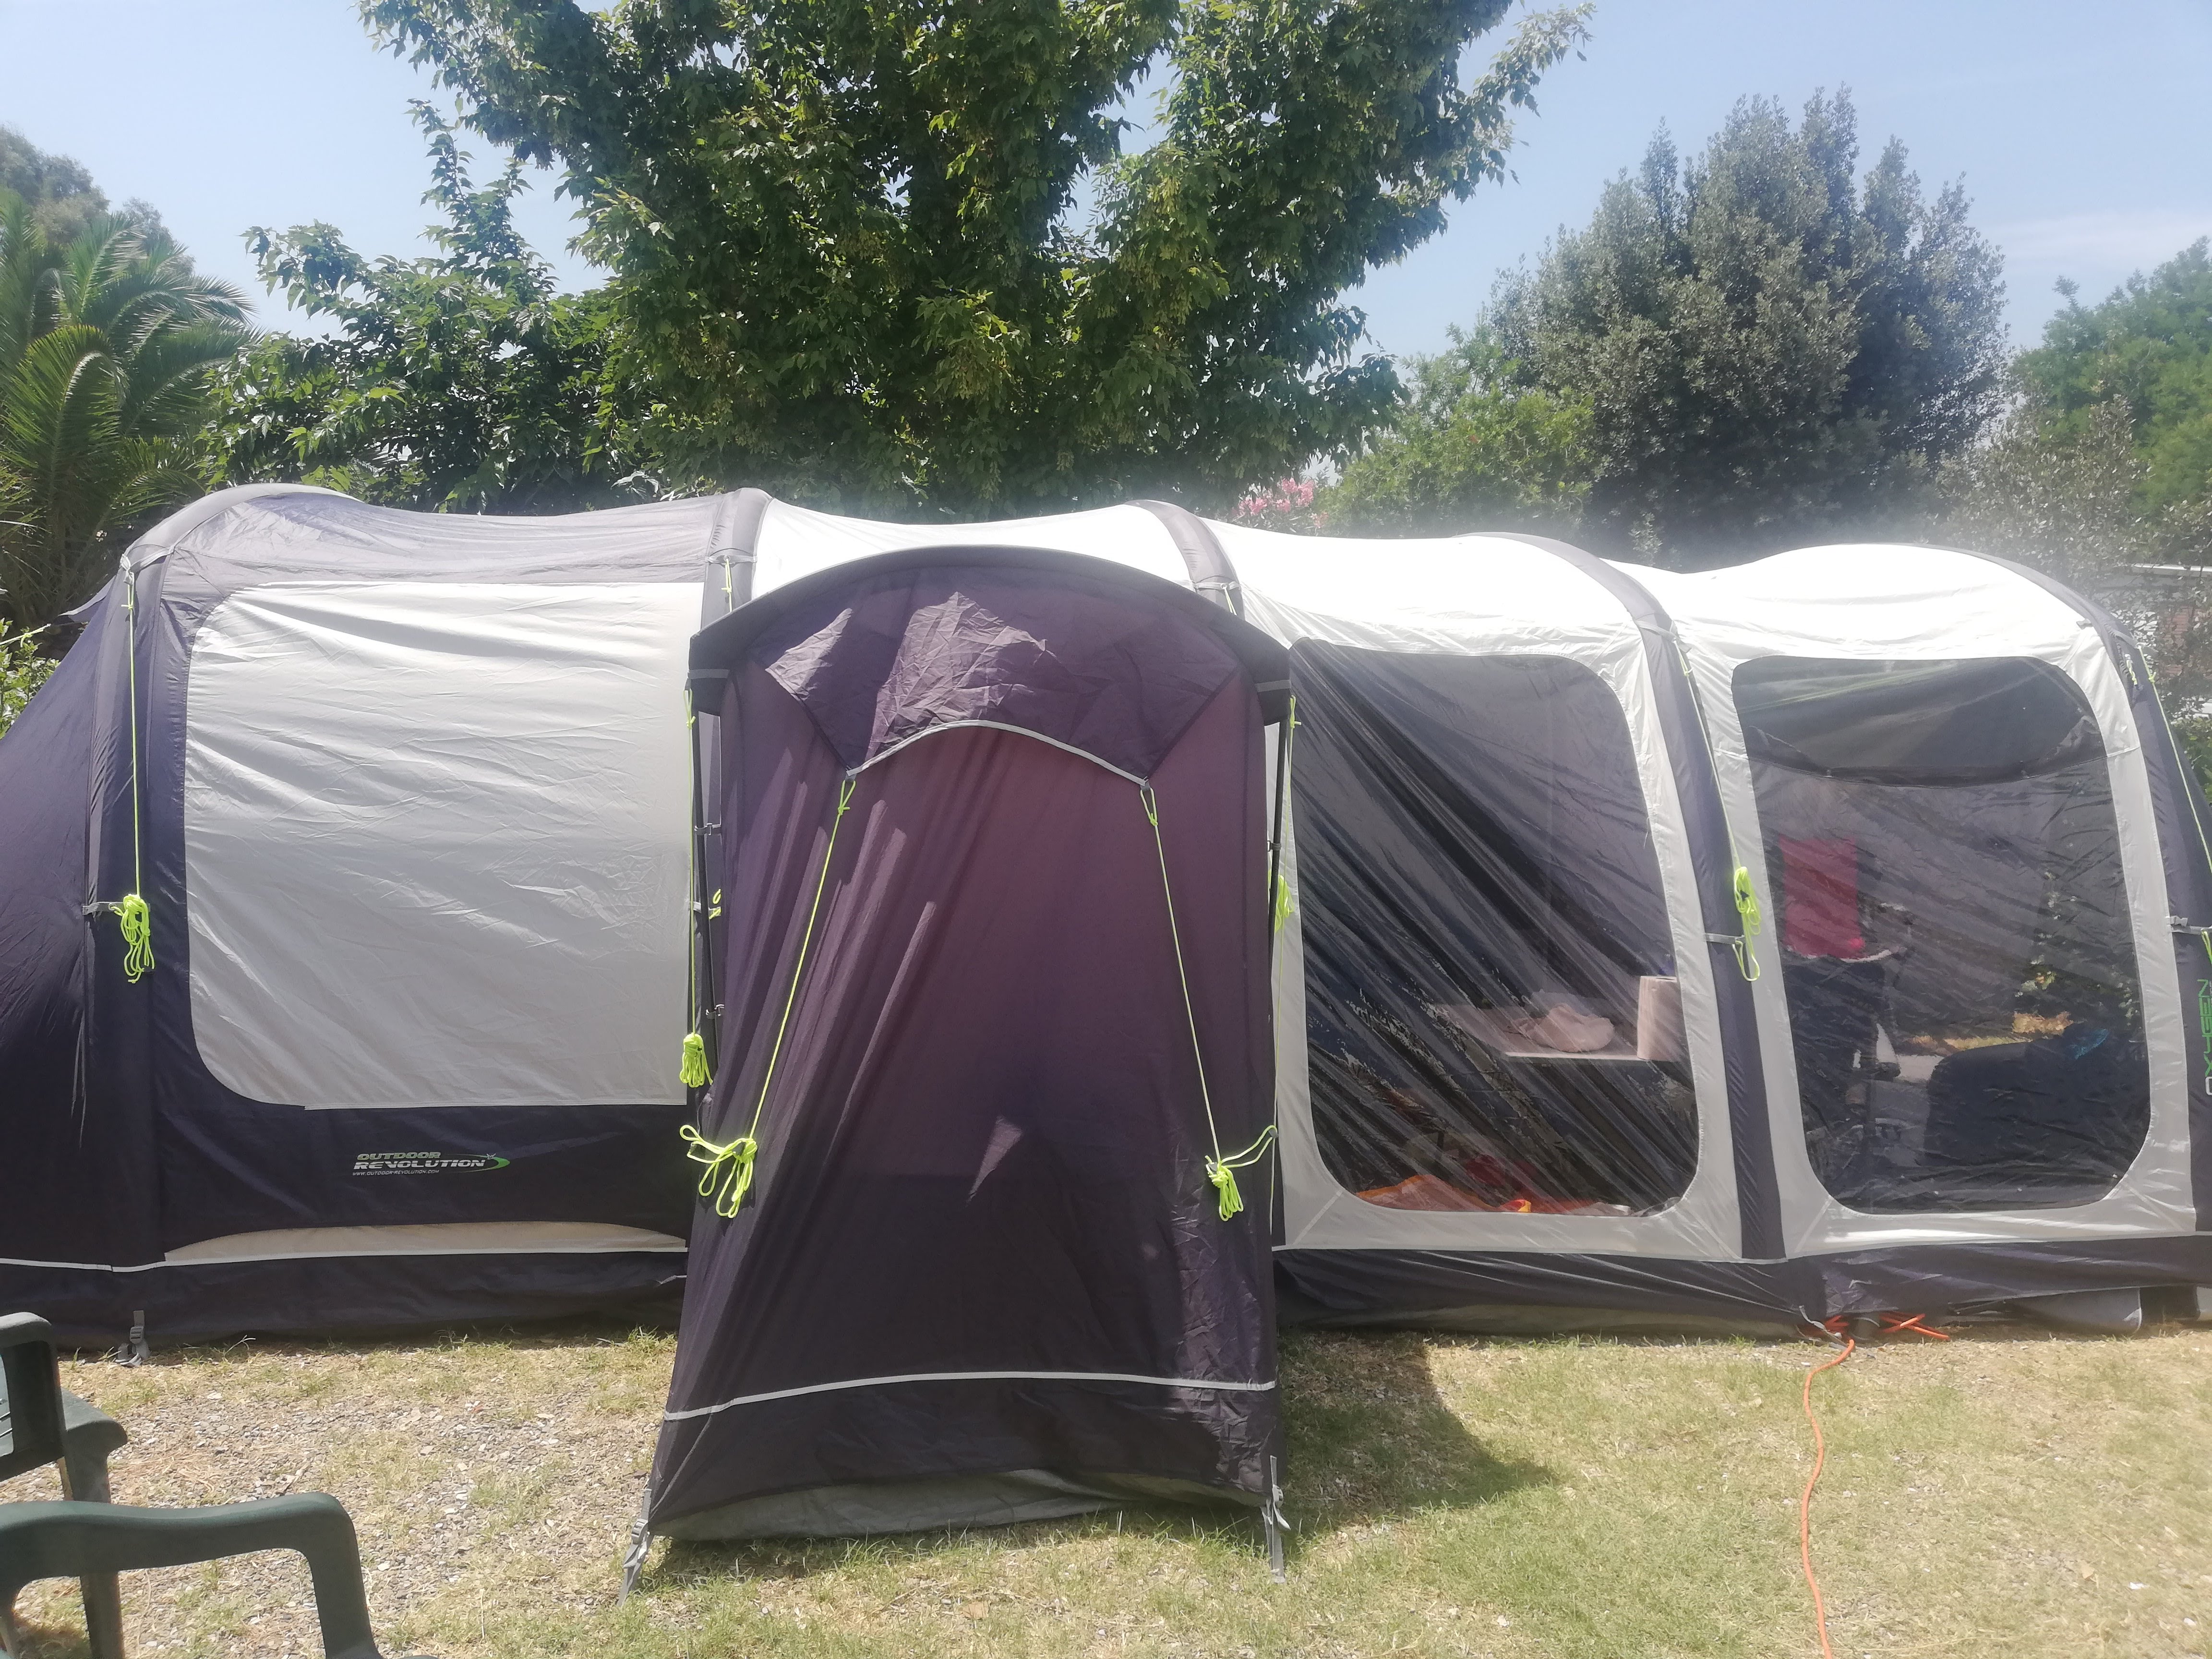 IMG_20190721_125104 Outdoor Revolution Air Dale 7 family tent review